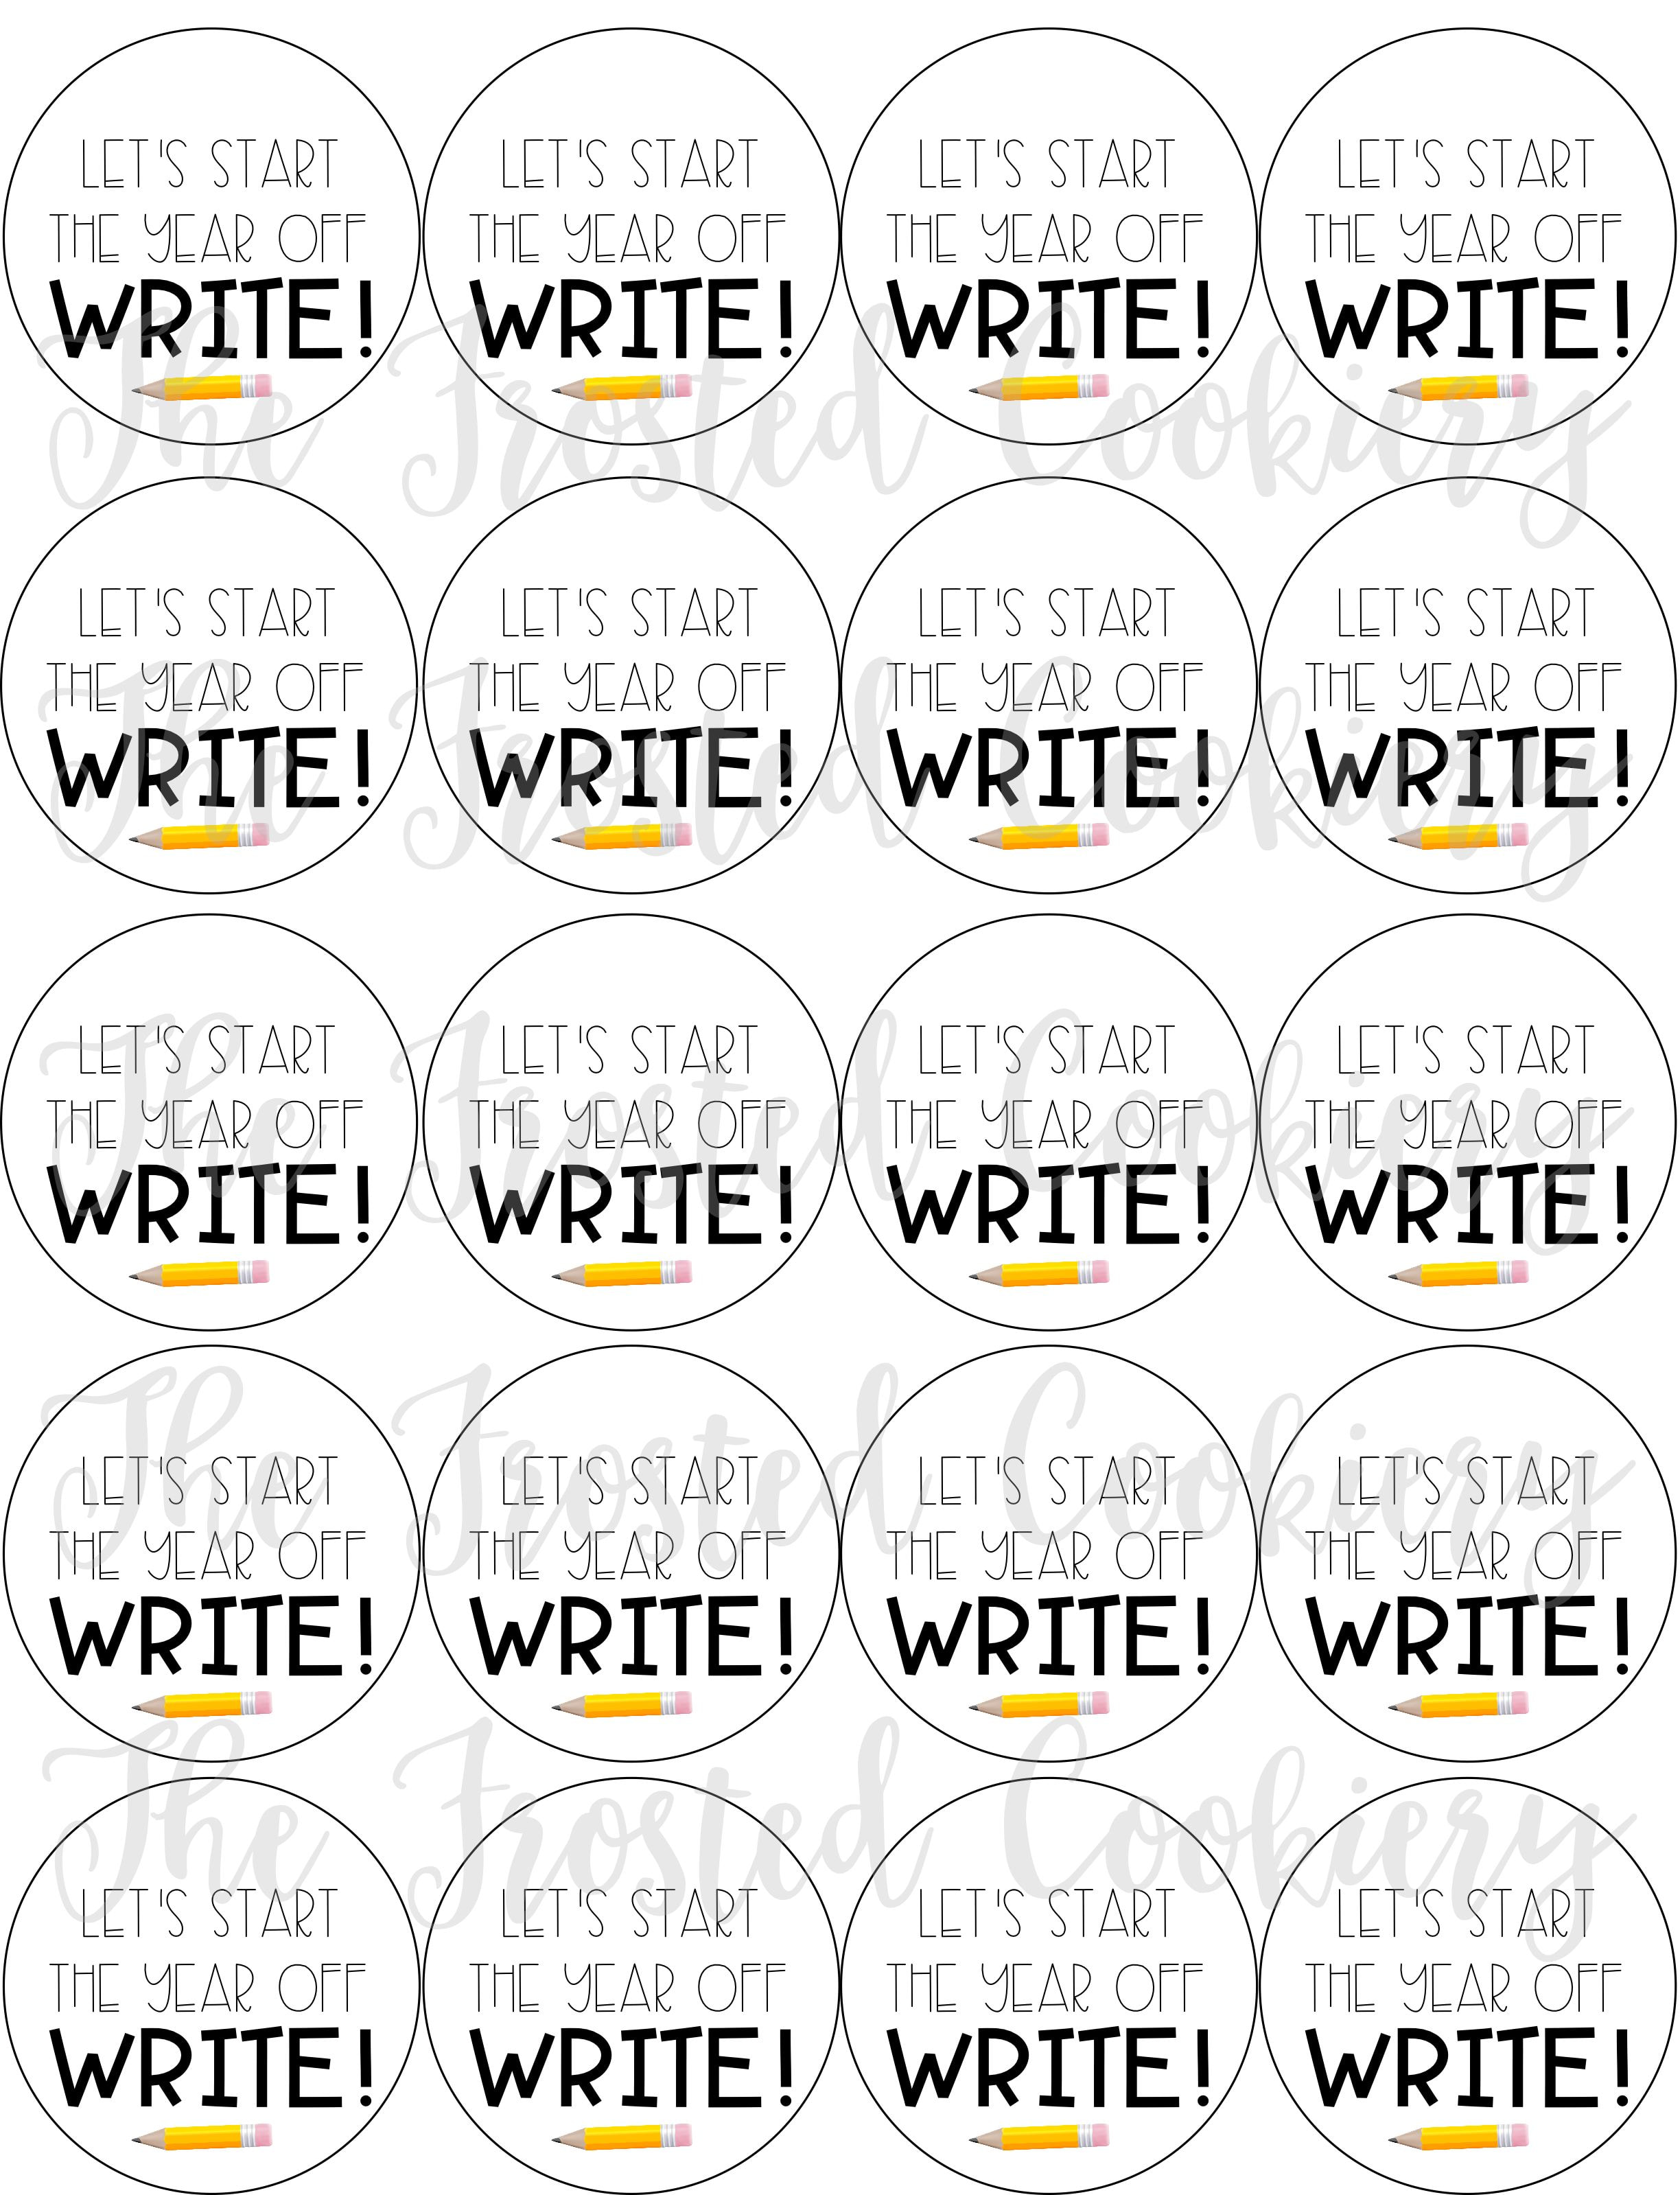 let-s-start-the-year-off-write-circle-tags